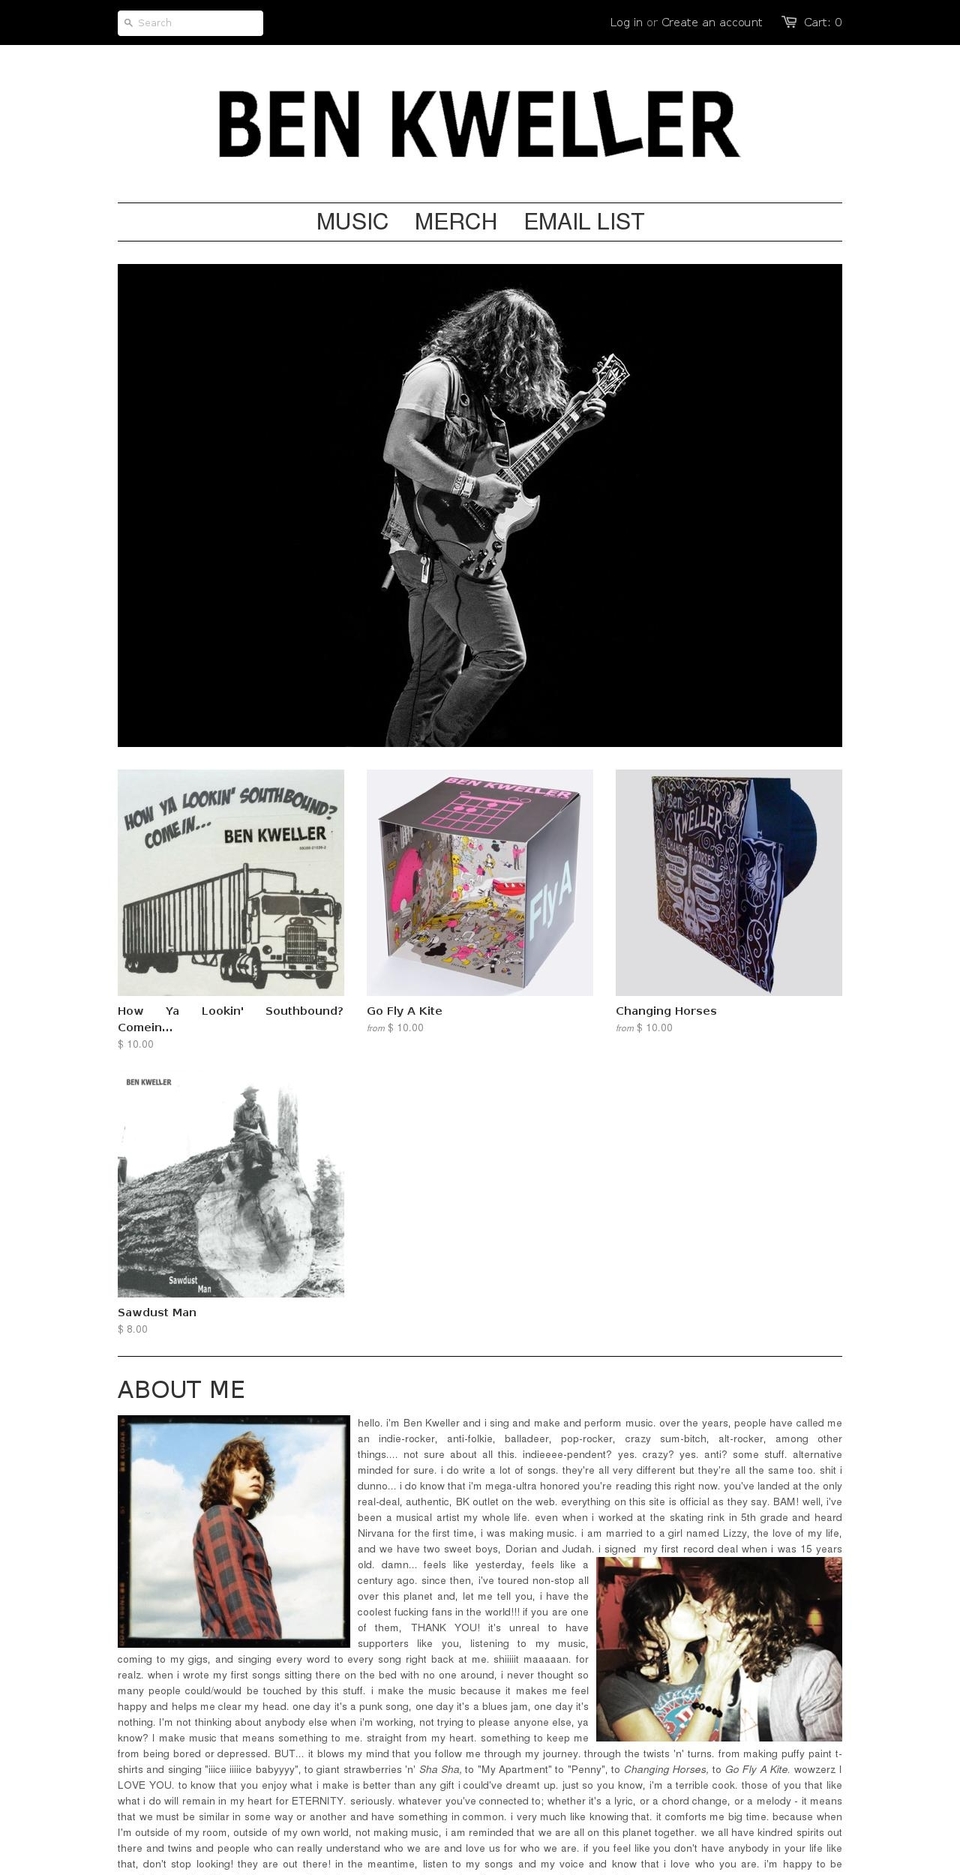 Startup Shopify theme site example benkweller.com